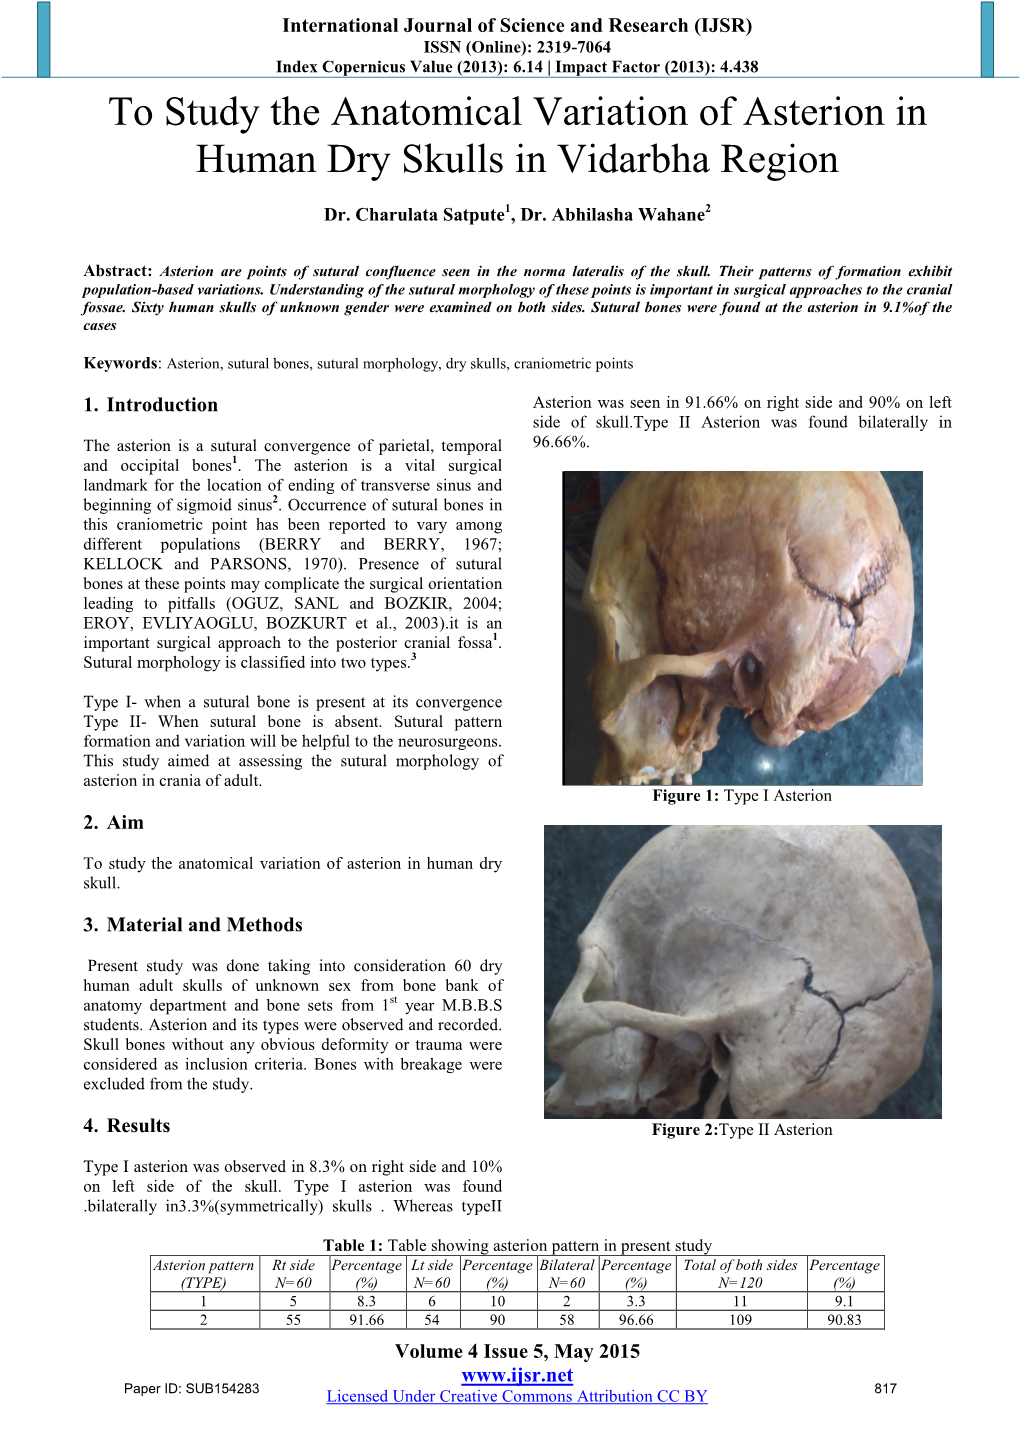 To Study the Anatomical Variation of Asterion in Human Dry Skulls in Vidarbha Region